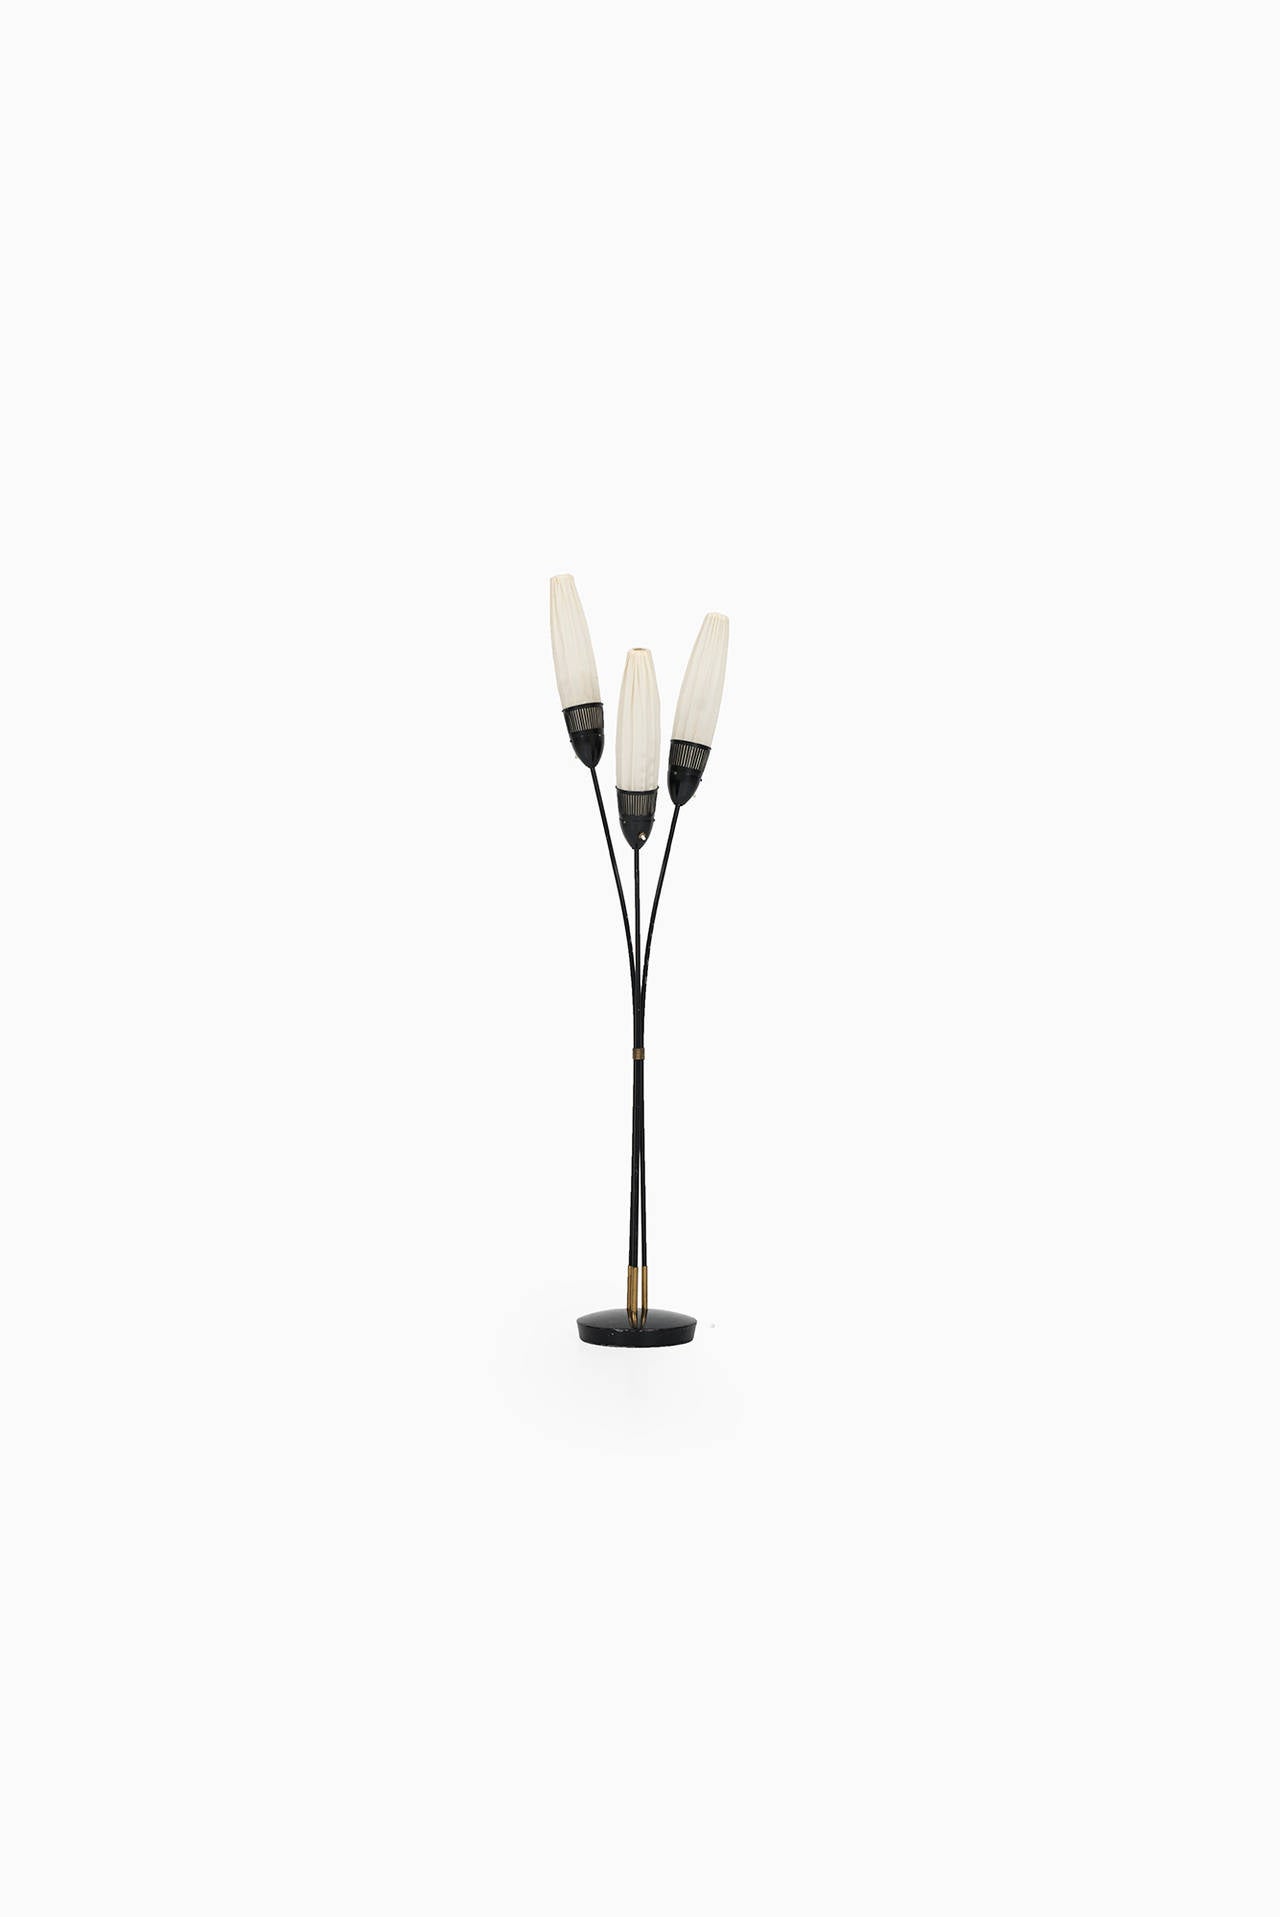 Mid century floor lamp in black lacquered metal probably produced in Sweden.